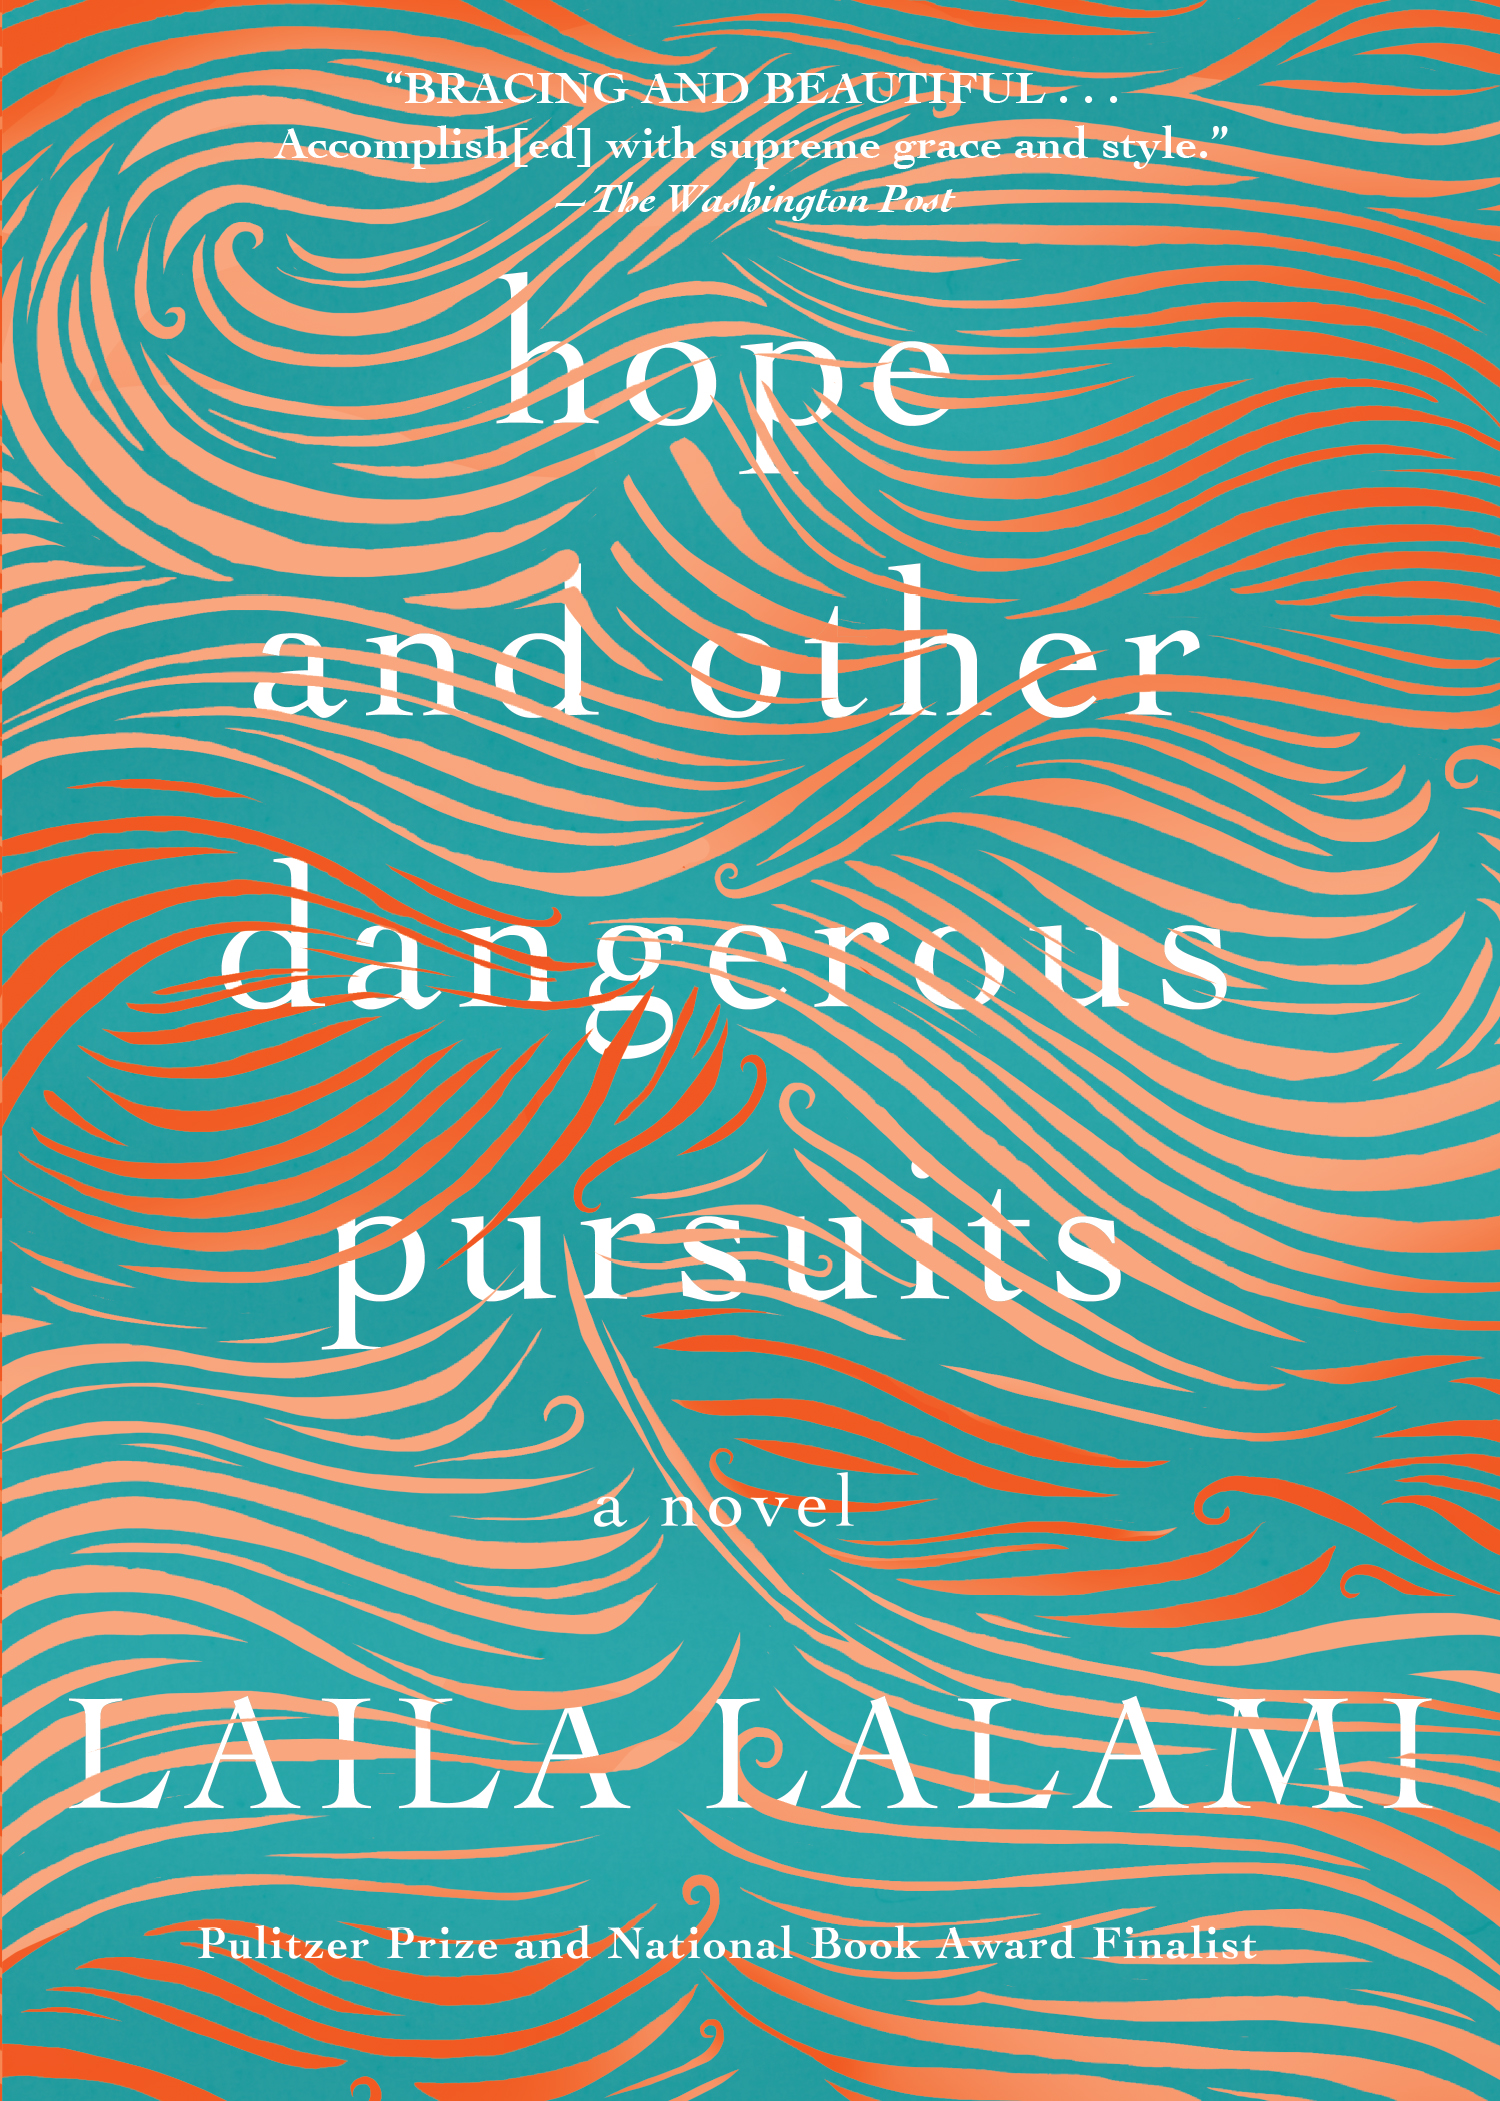 Hope and Other Dangerous Pursuits - 10-14.99